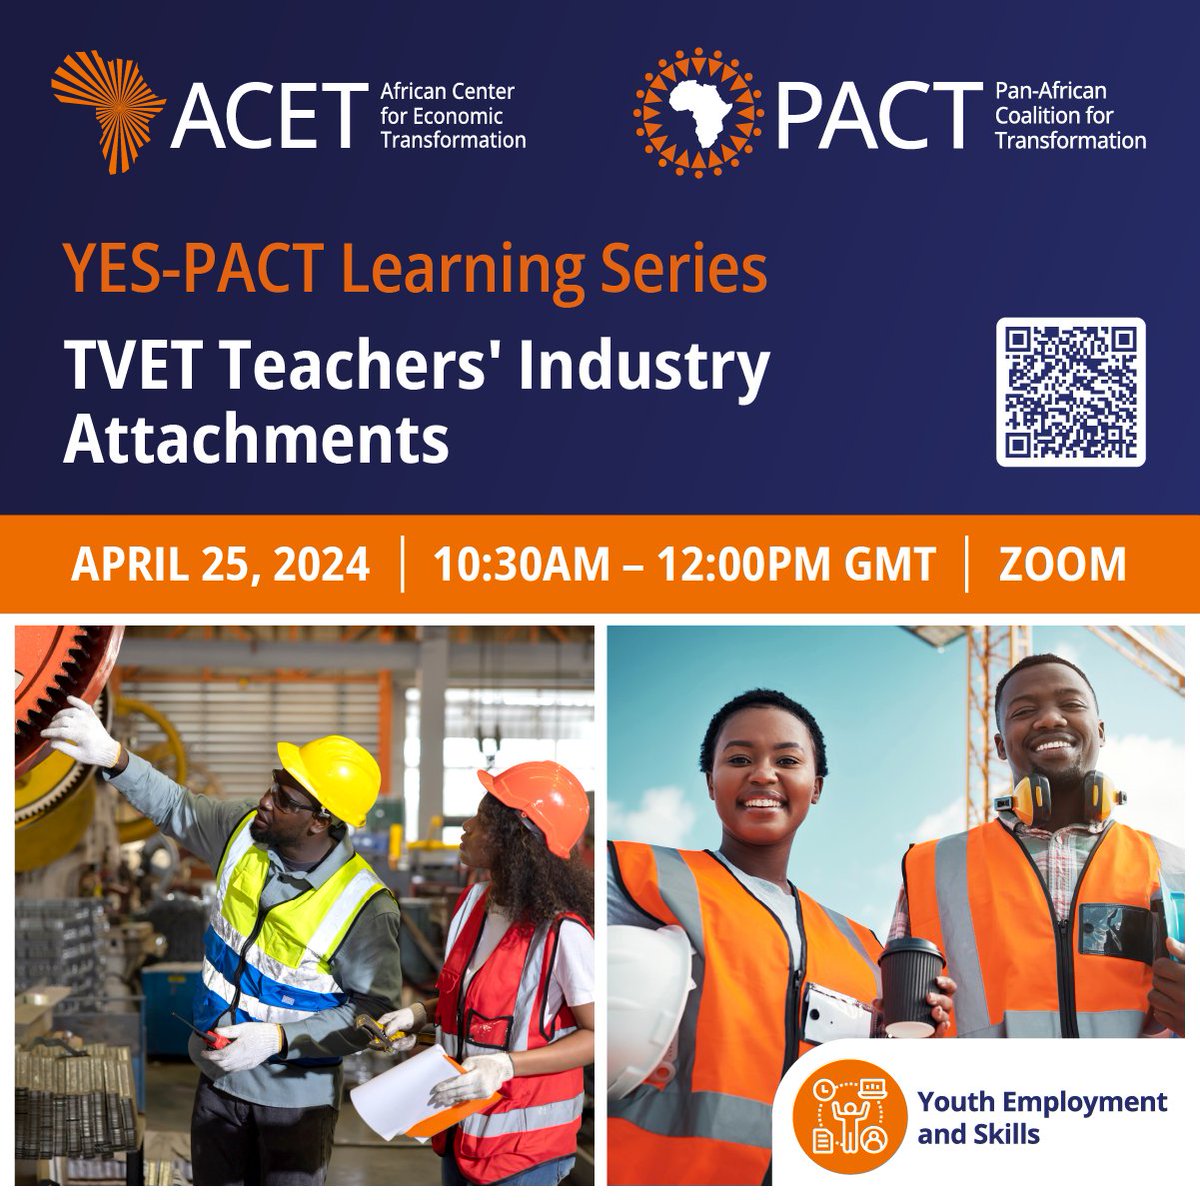 The success of #TVET hinges on skilled teachers. Yet many lack real-world industry experience. Join us as we discuss strategies to upskill TVET educators for the #FutureOfWork. Register for our YES-PACT Learning Series: bit.ly/3JpTNJY